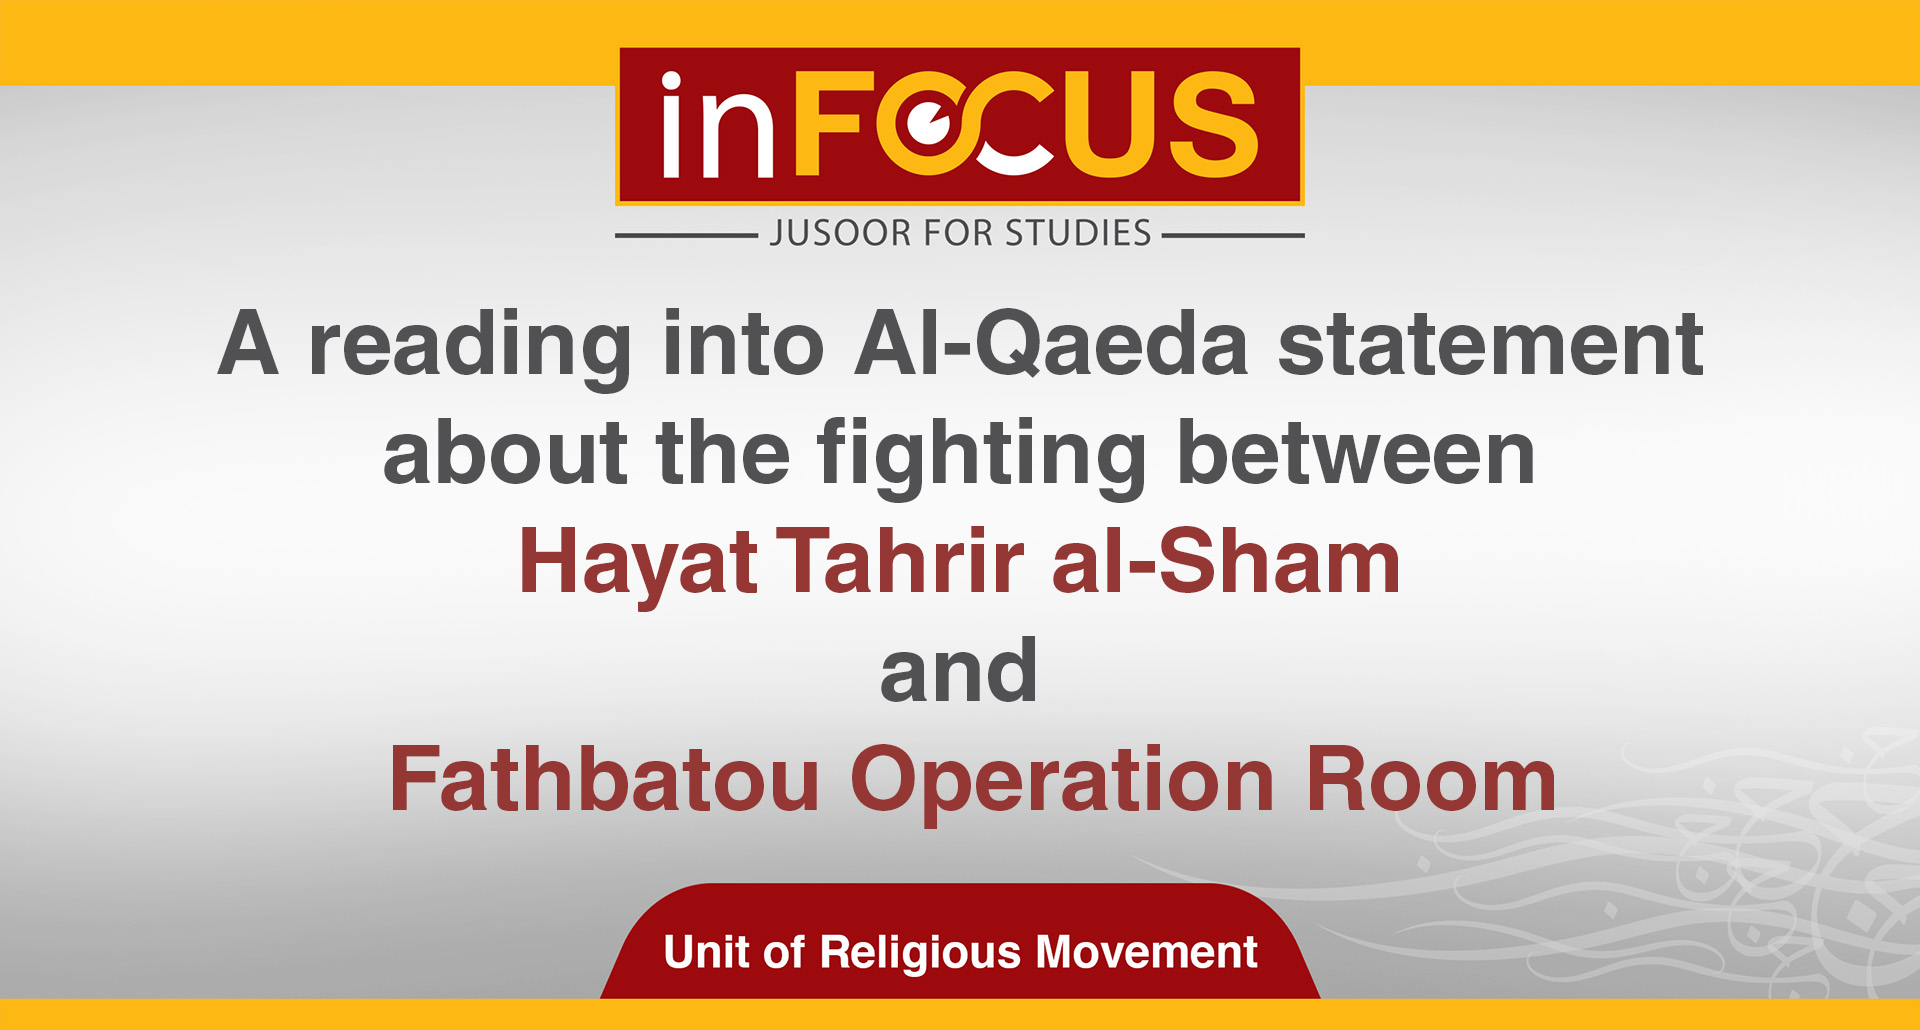 A reading into Al-Qaeda statement about the fighting between Hayat Tahrir al-Sham and Fathbatou Operation Room